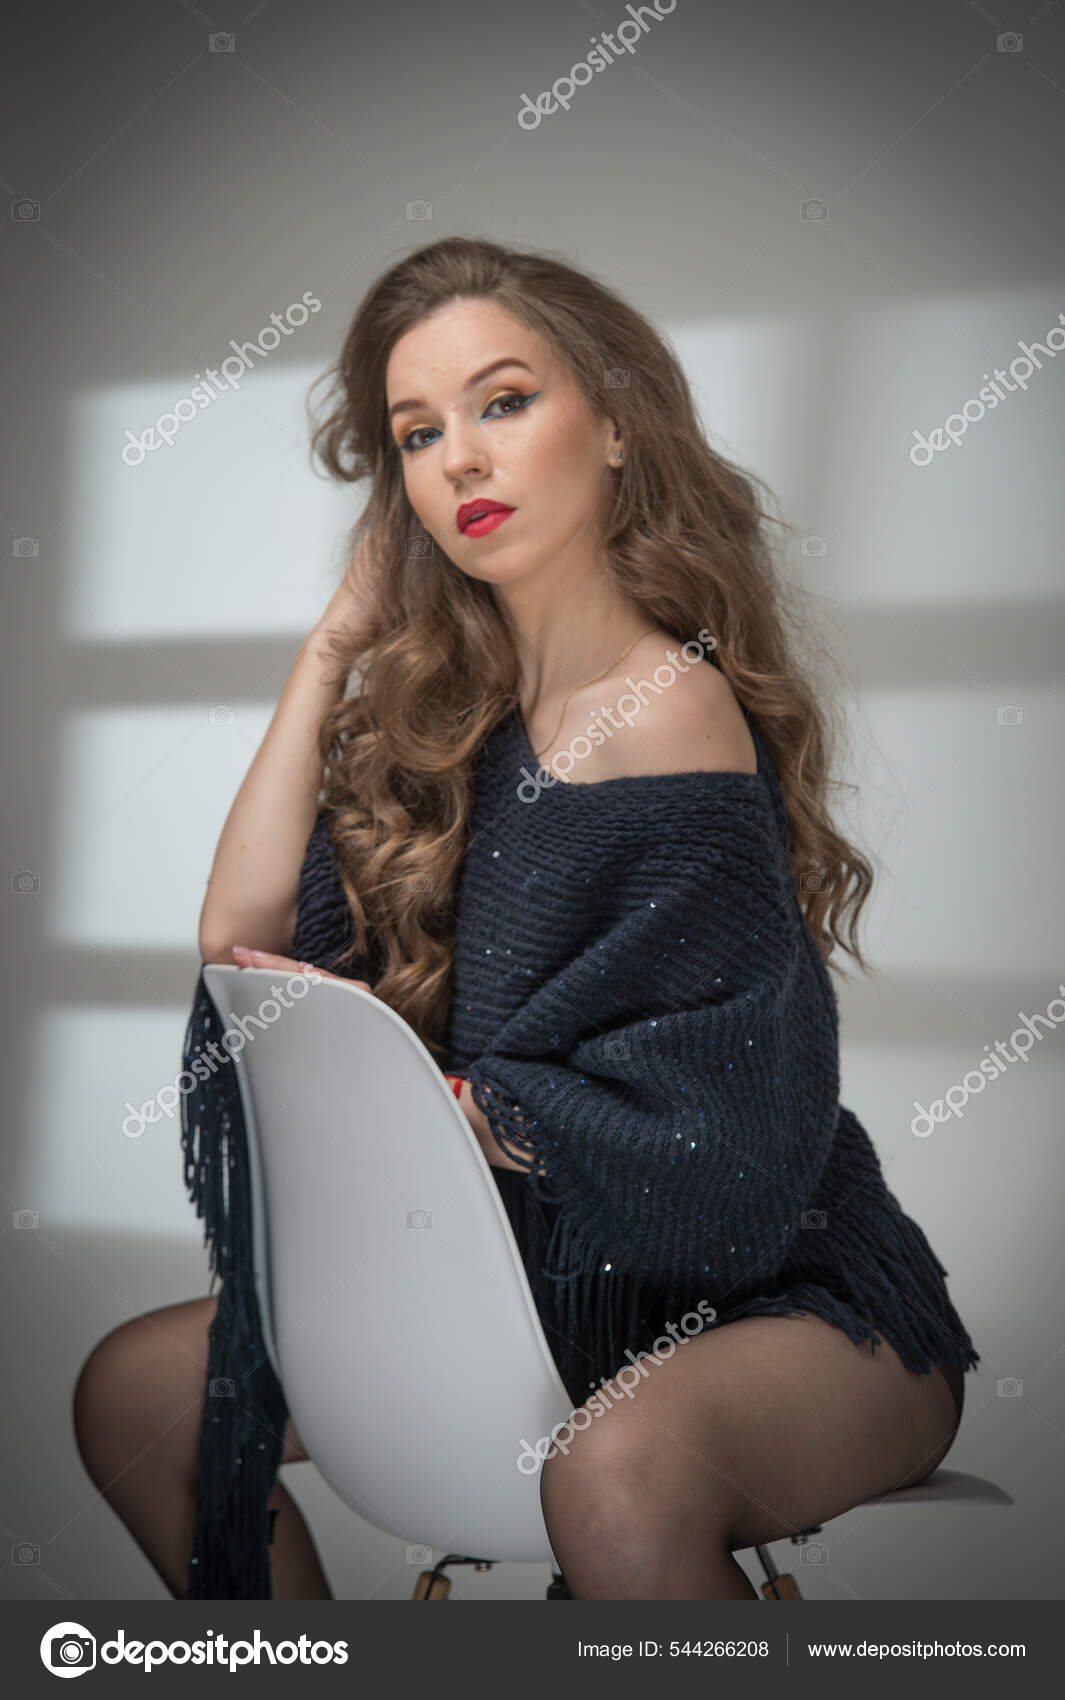 Sexy Beautiful Woman With Long Hair And A Black Transparent Pantyhose Lying  On A Sofa Stock Photo, Picture and Royalty Free Image. Image 146133824.